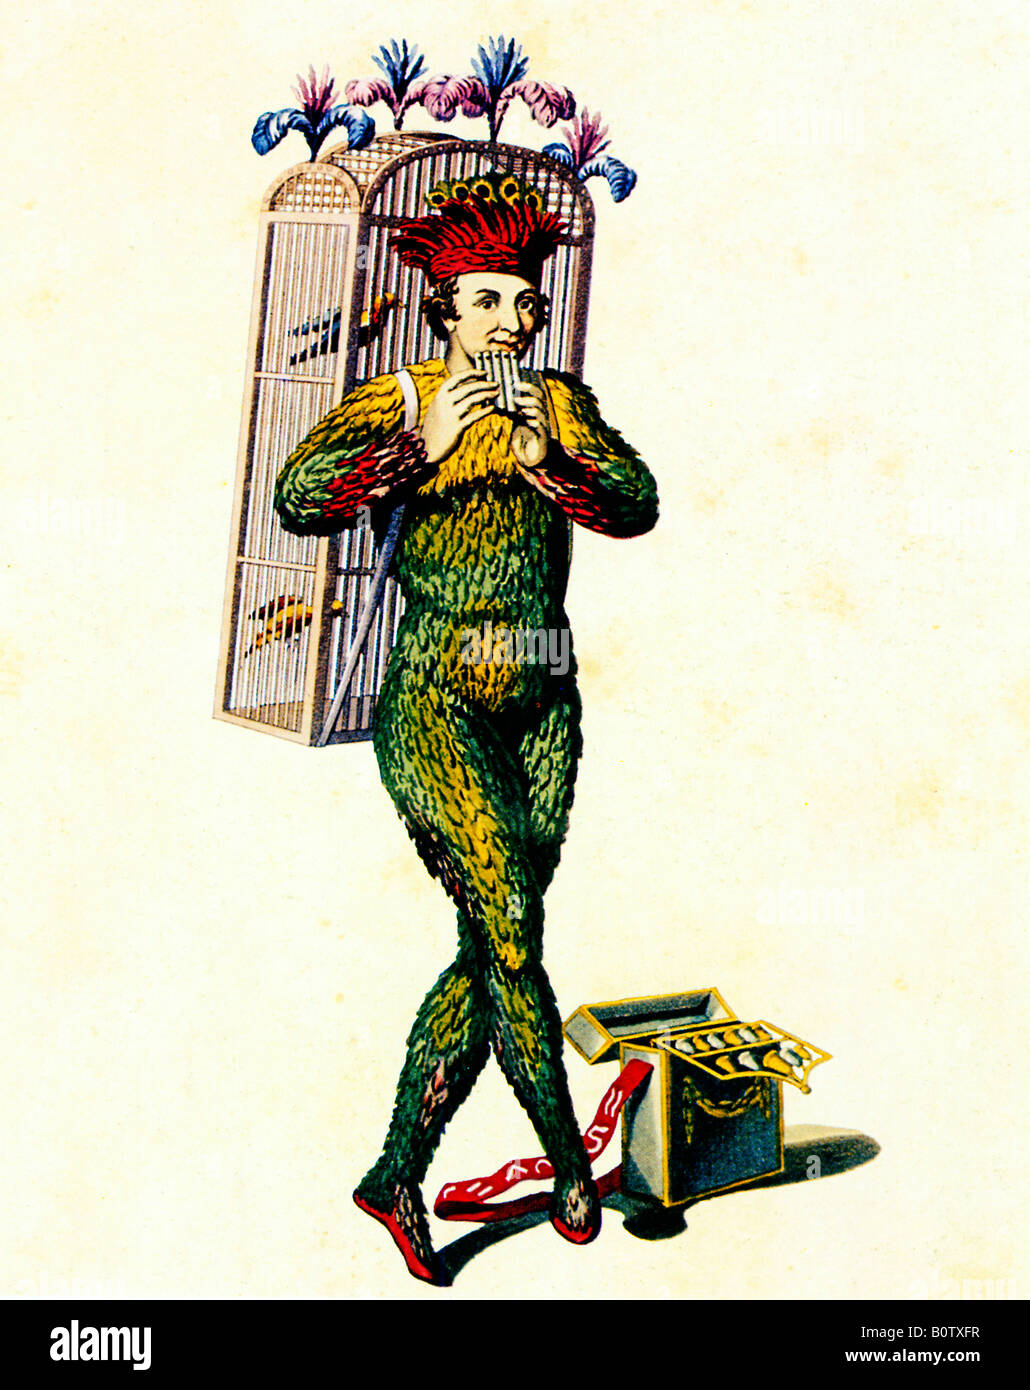 The Magic Flute 1816 by Thiele of the costume design by Sturmer for the Berlin production by Schinkel of the Mozart opera Stock Photo